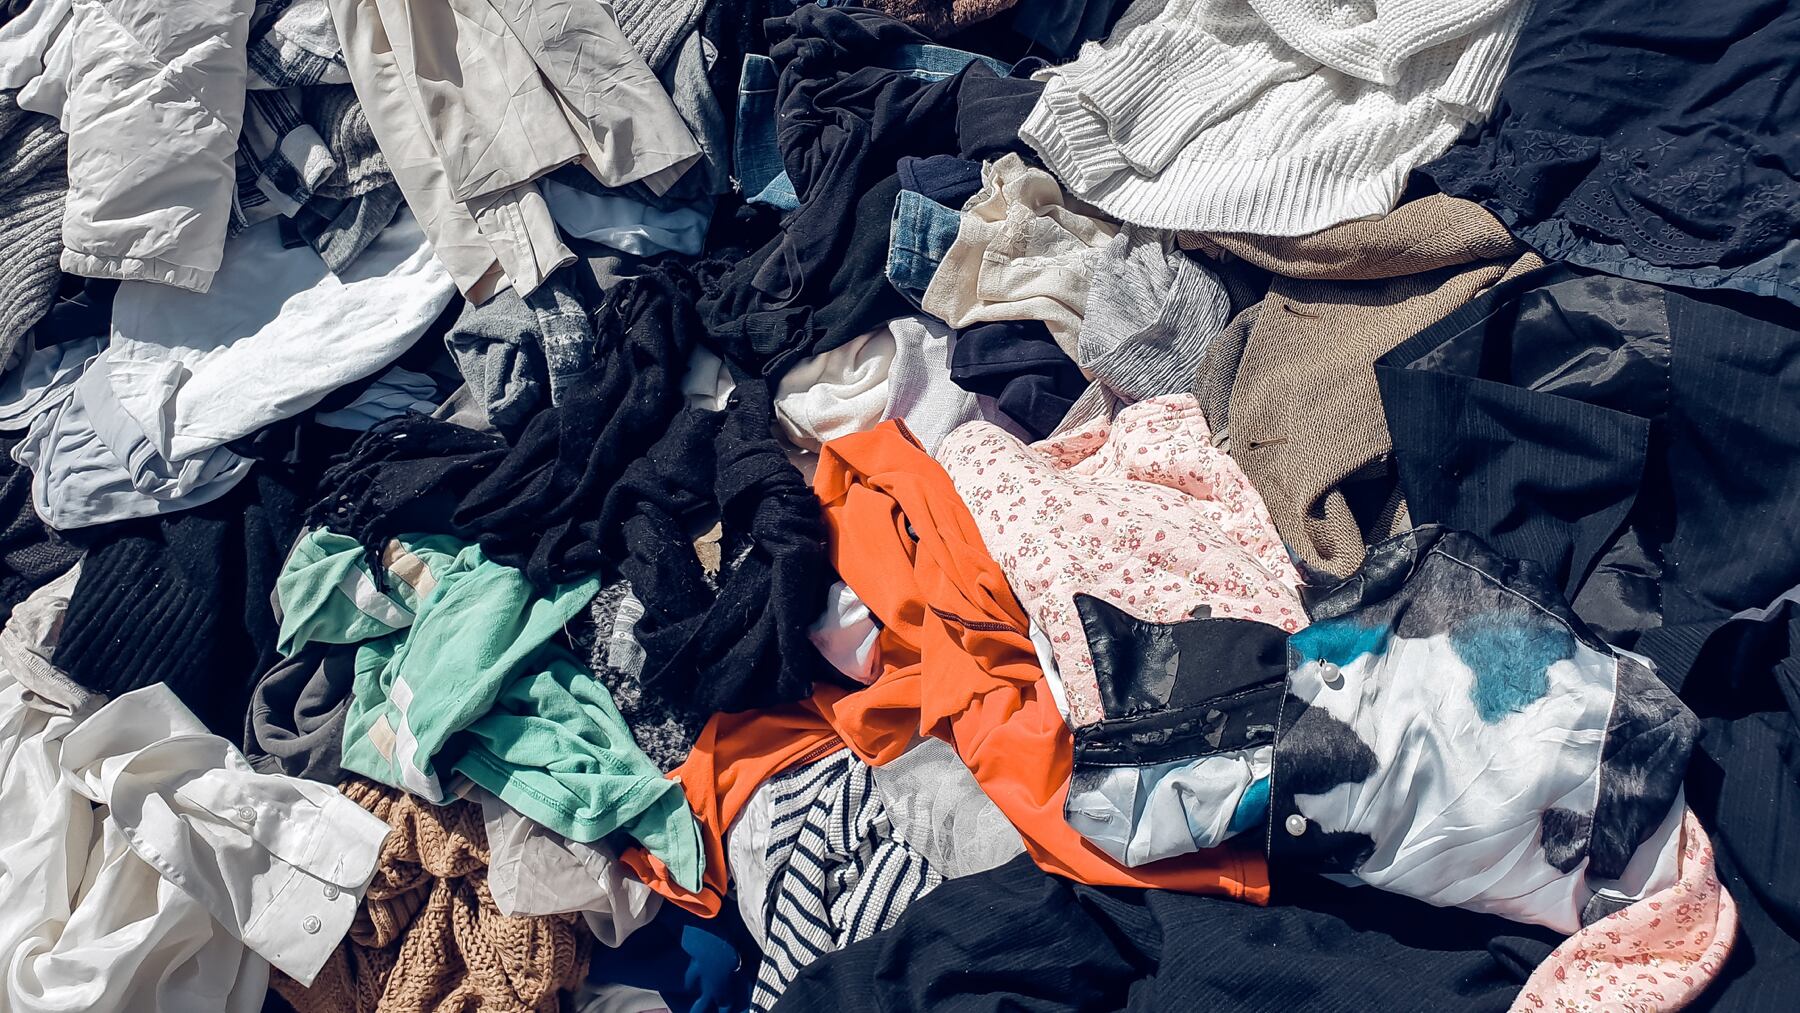 A pile of clothes at end-of-life.